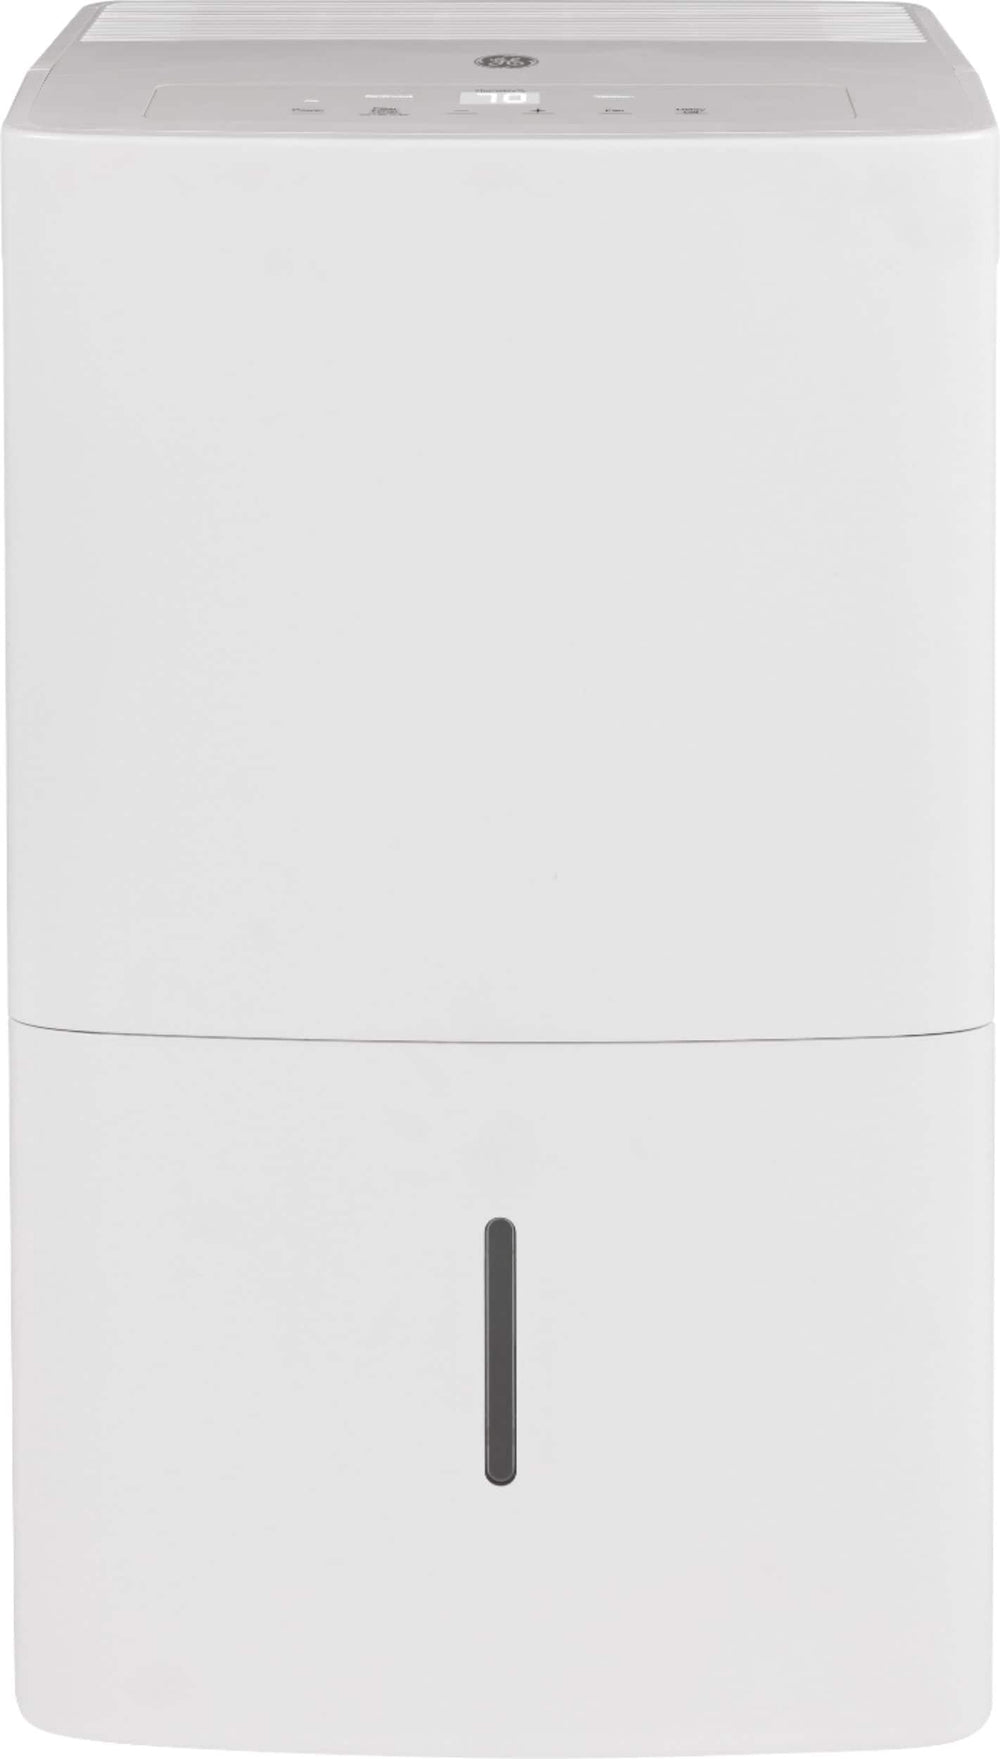 GE - 50-Pint Portable Dehumidifier with 3 Fan Speeds - White_1